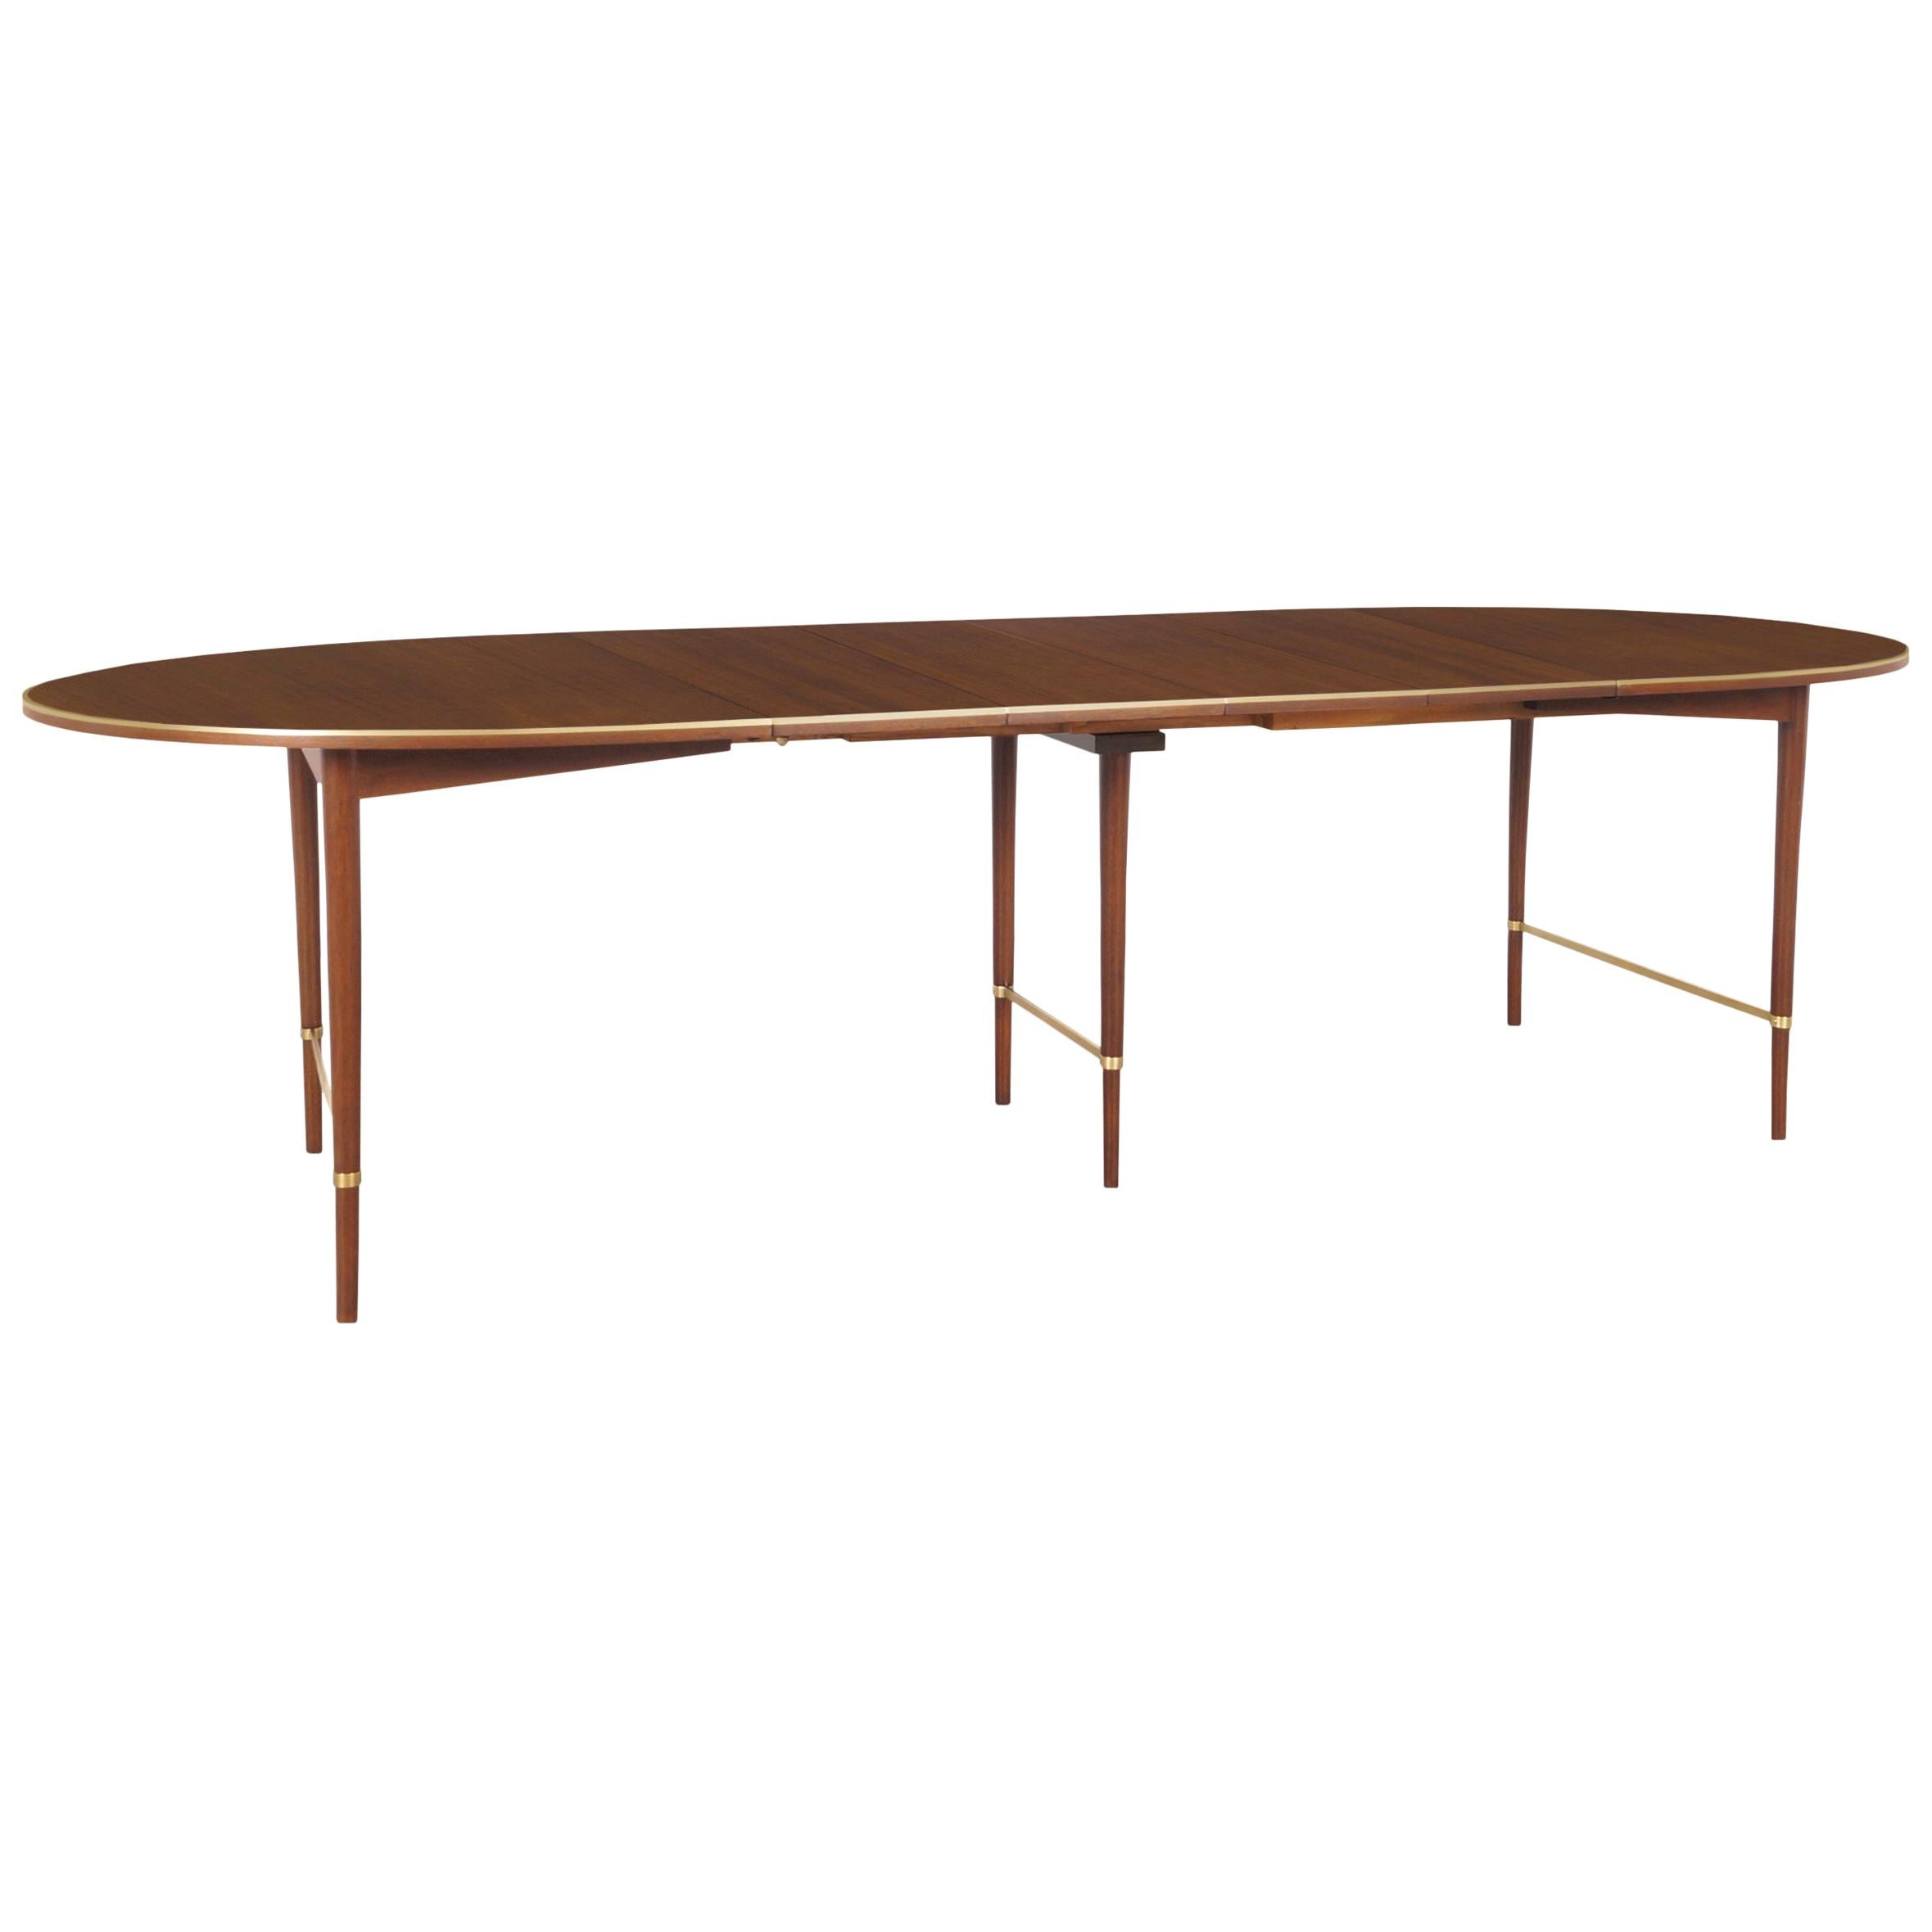 Vintage Expanding "Connoisseur Collection" Dining Table by Paul McCobb